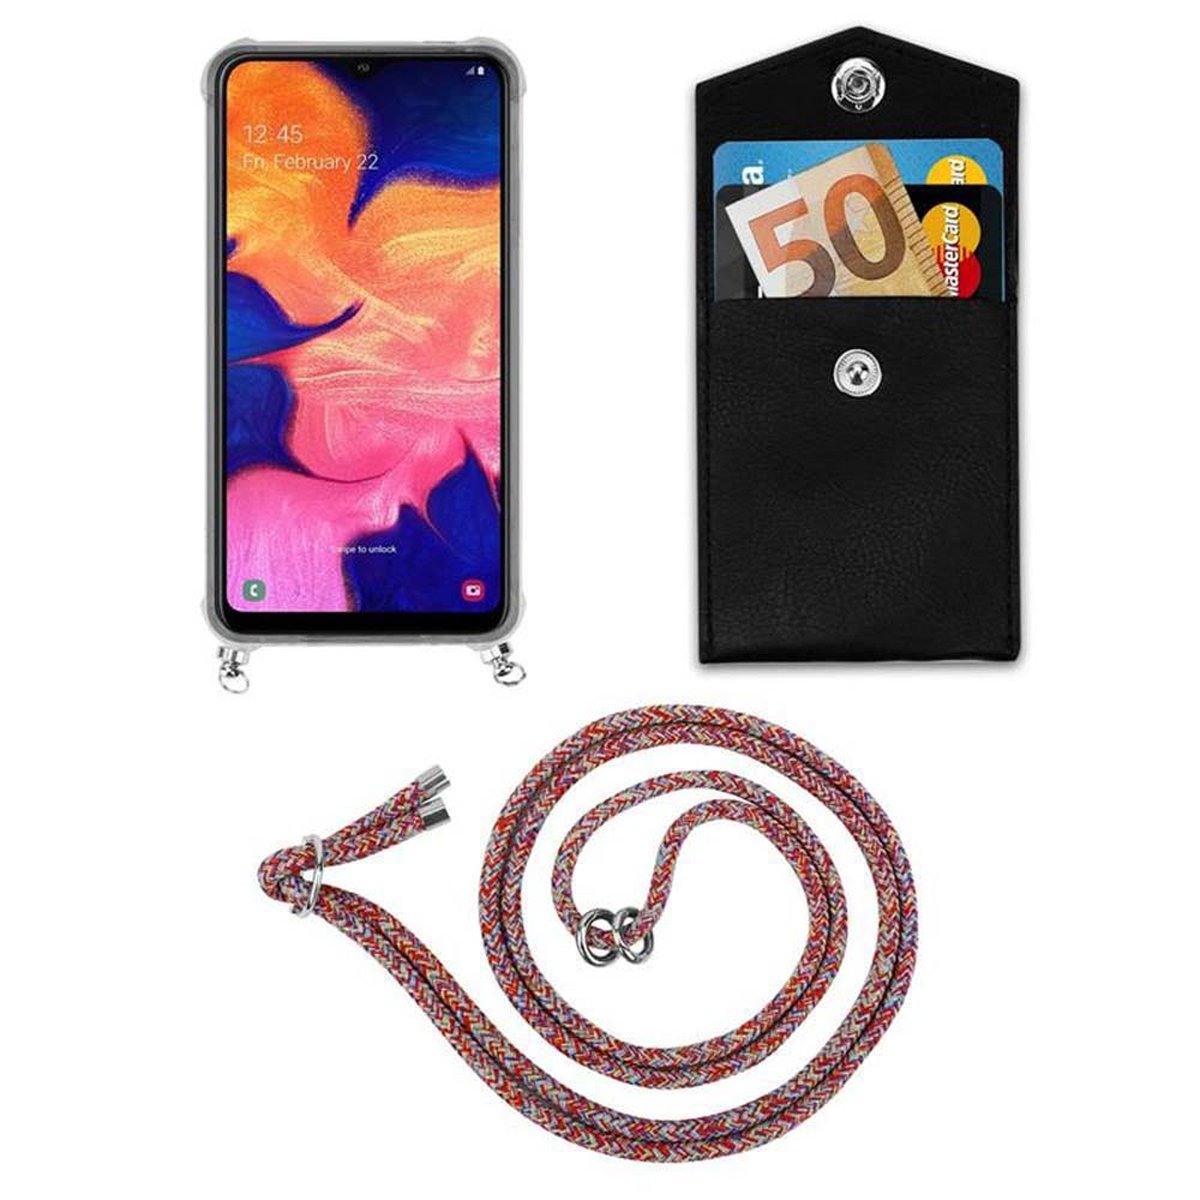 und mit Ringen, abnehmbarer Hülle, CADORABO Galaxy M10, / Band Kette Handy Silber Samsung, A10 COLORFUL Backcover, PARROT Kordel